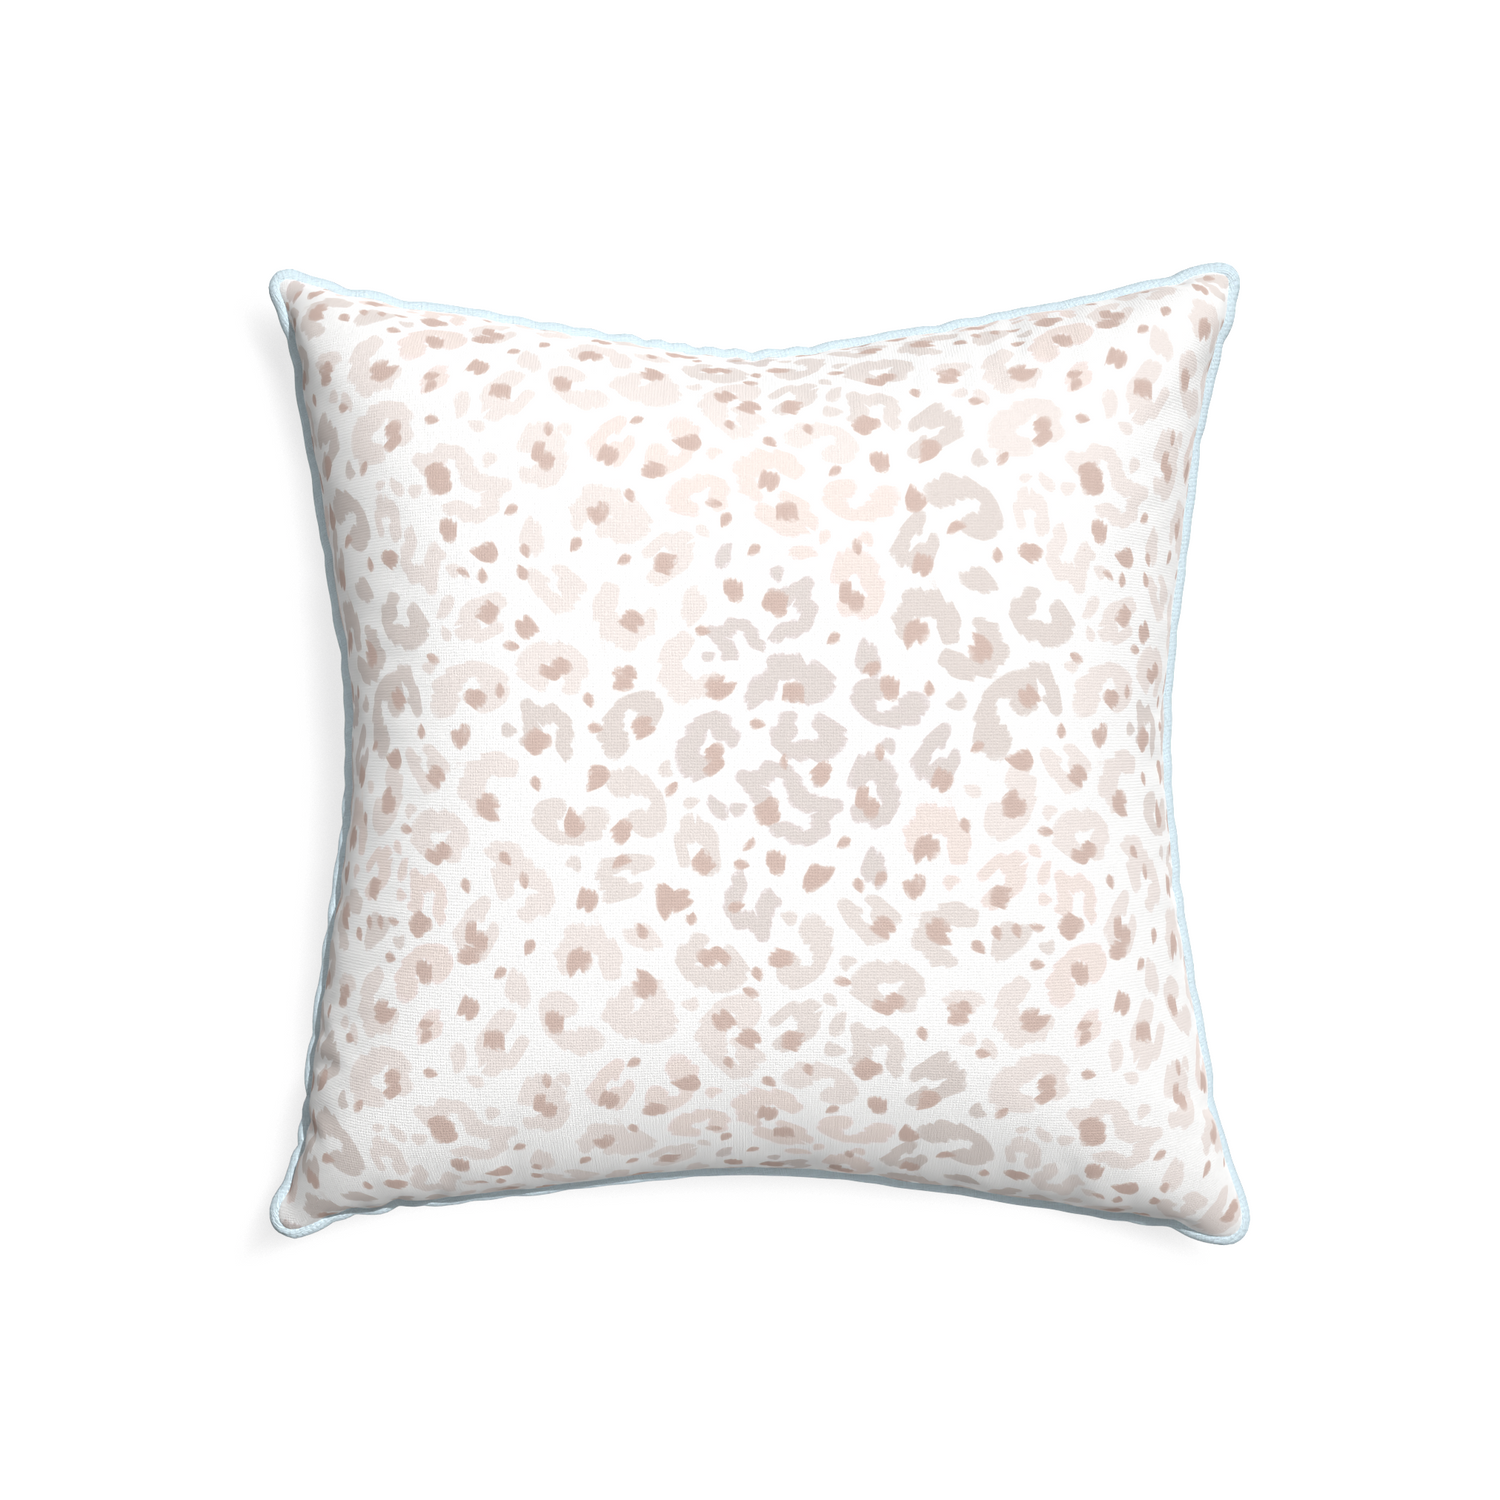 22-square rosie custom pillow with powder piping on white background